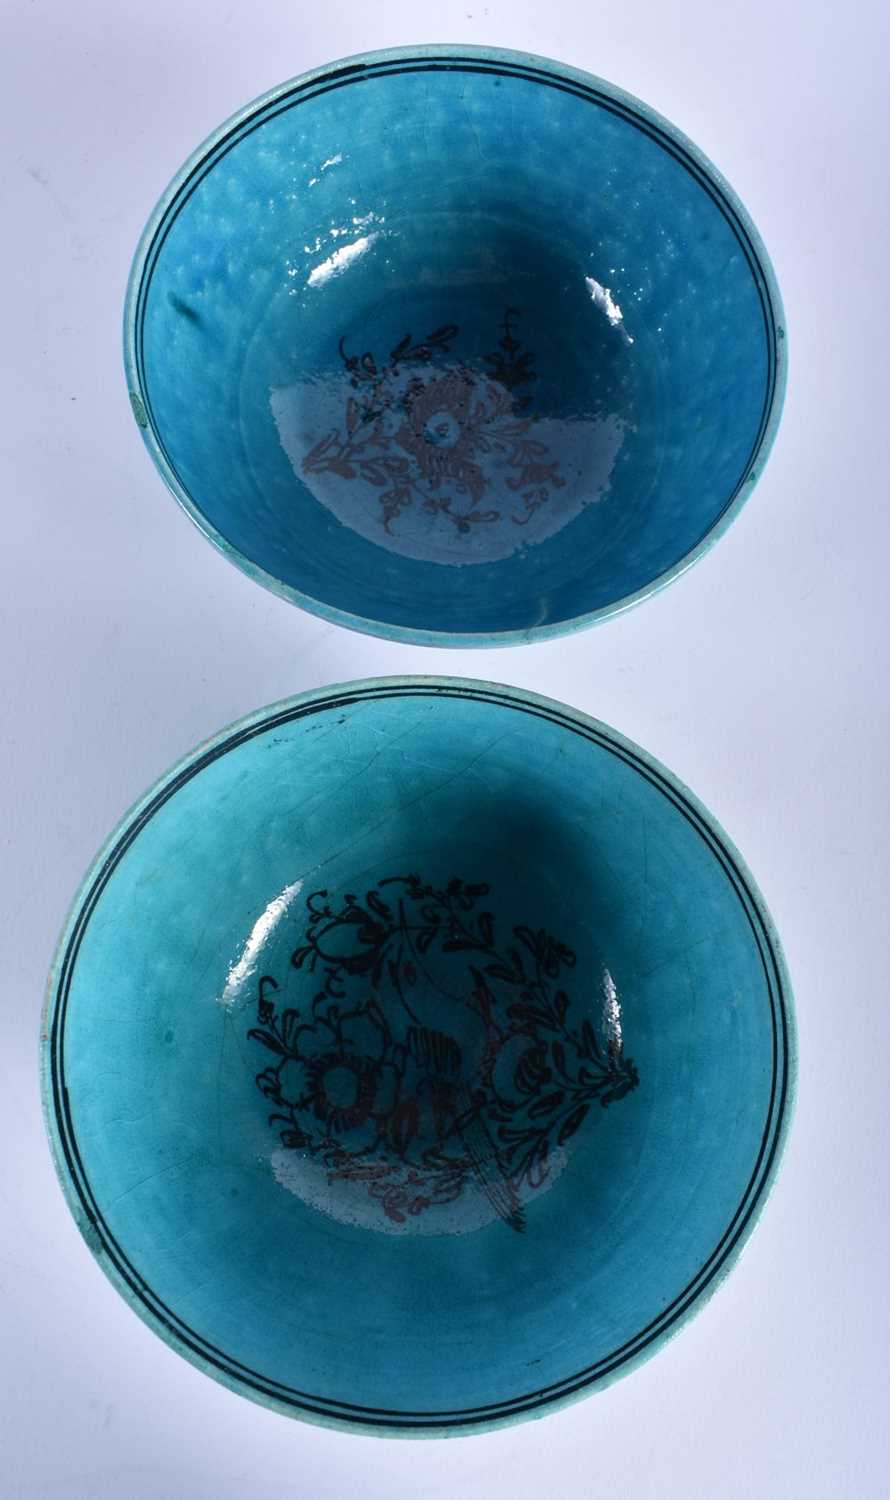 A PERSIAN SAFAVID TURQUOISE GLAZED POTTERY VASE together with a similar bowls. Largest 22 cm x 15 - Image 6 of 7